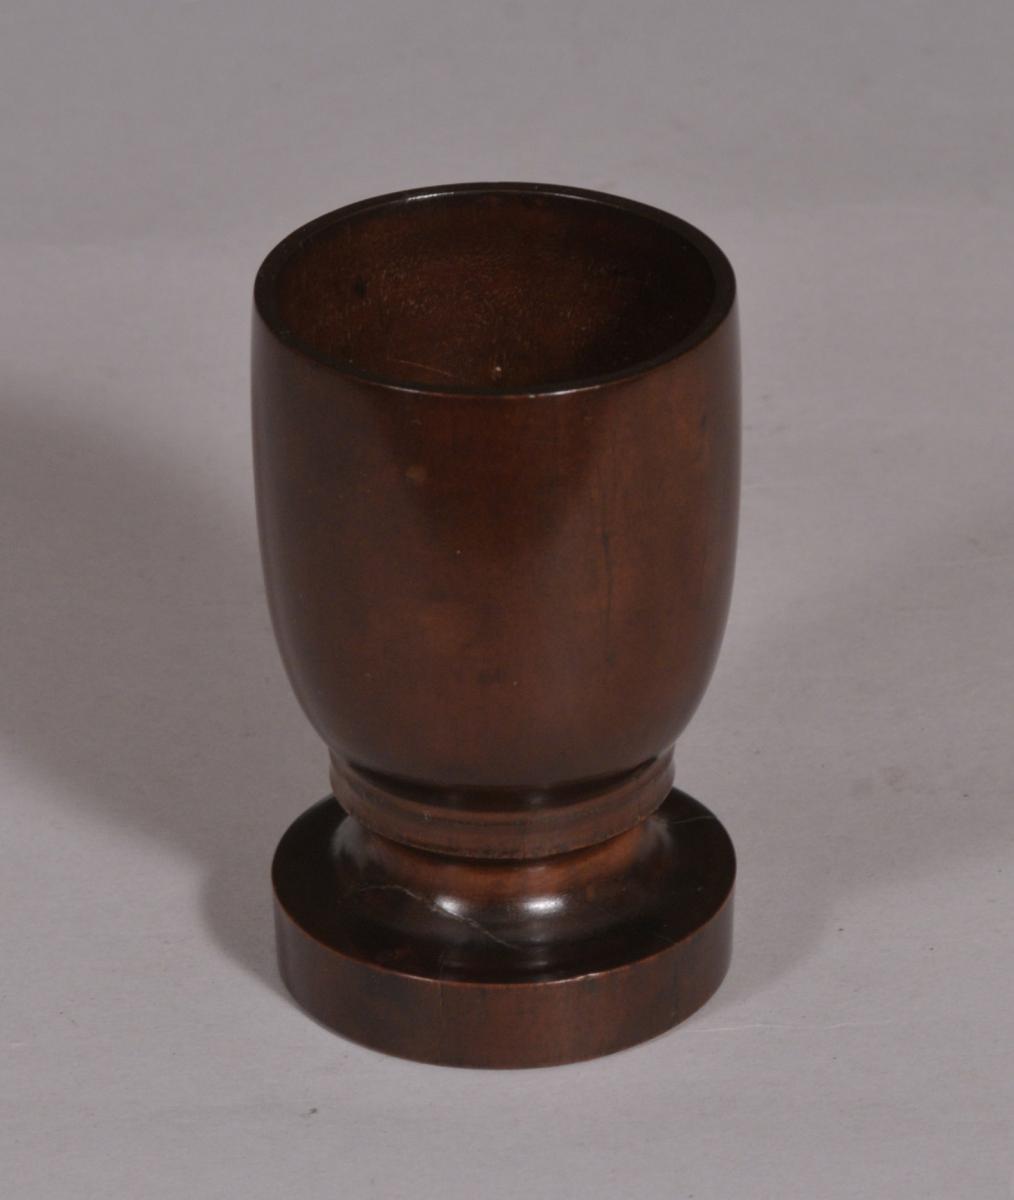 S/4515 Antique Treen Early 19th Century Cherry Wood Goblet Shaped Container